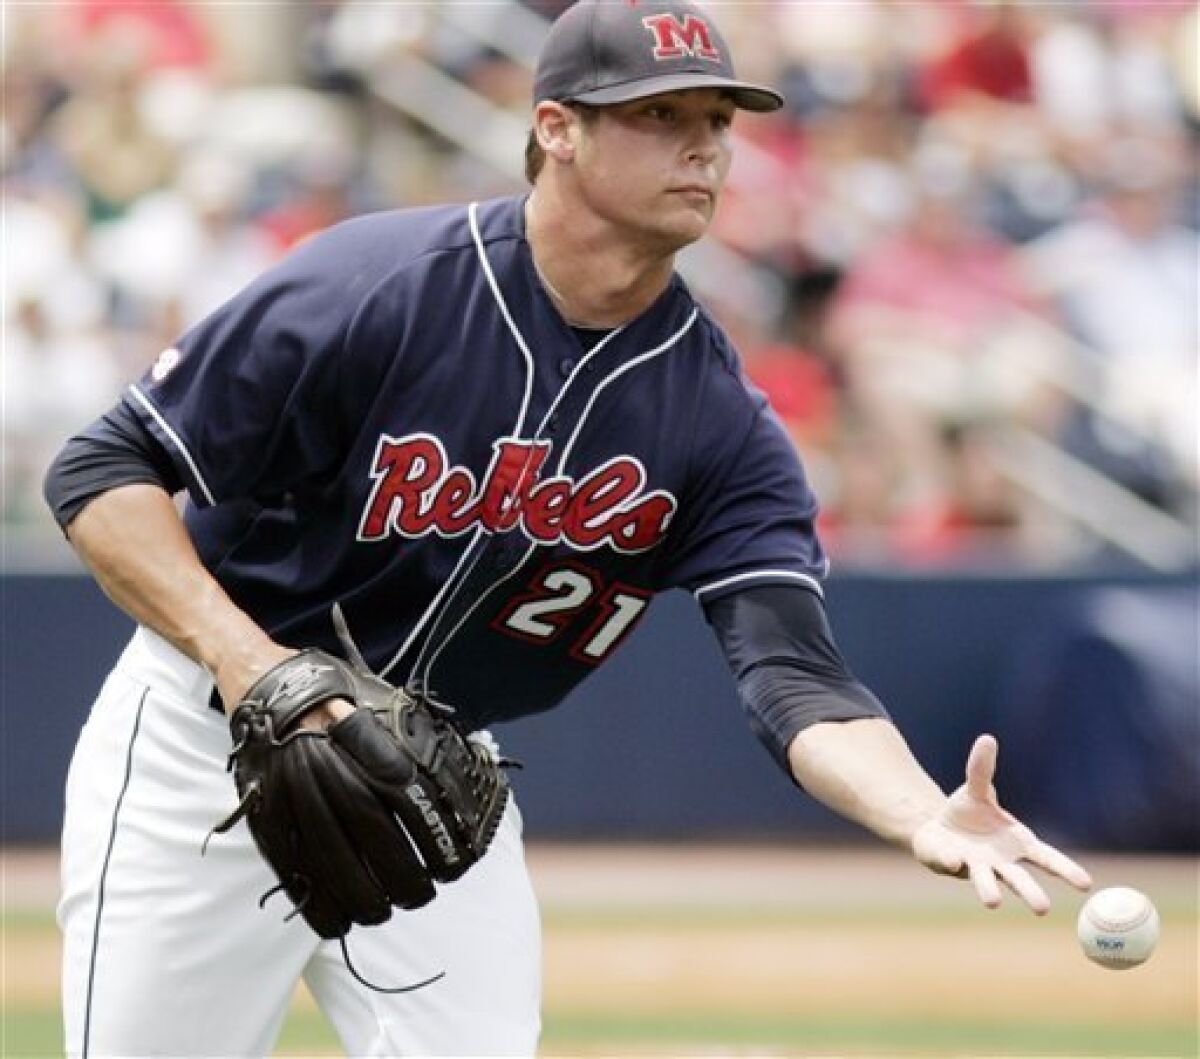 Mississippi pitcher Nathan Baker tosses the ball to first base for a ground-out by Virginia during an NCAA super regional Baseball championship game in Oxford, Miss., Sunday, June 7, 2009. (AP Photo/Rogelio V. Solis)